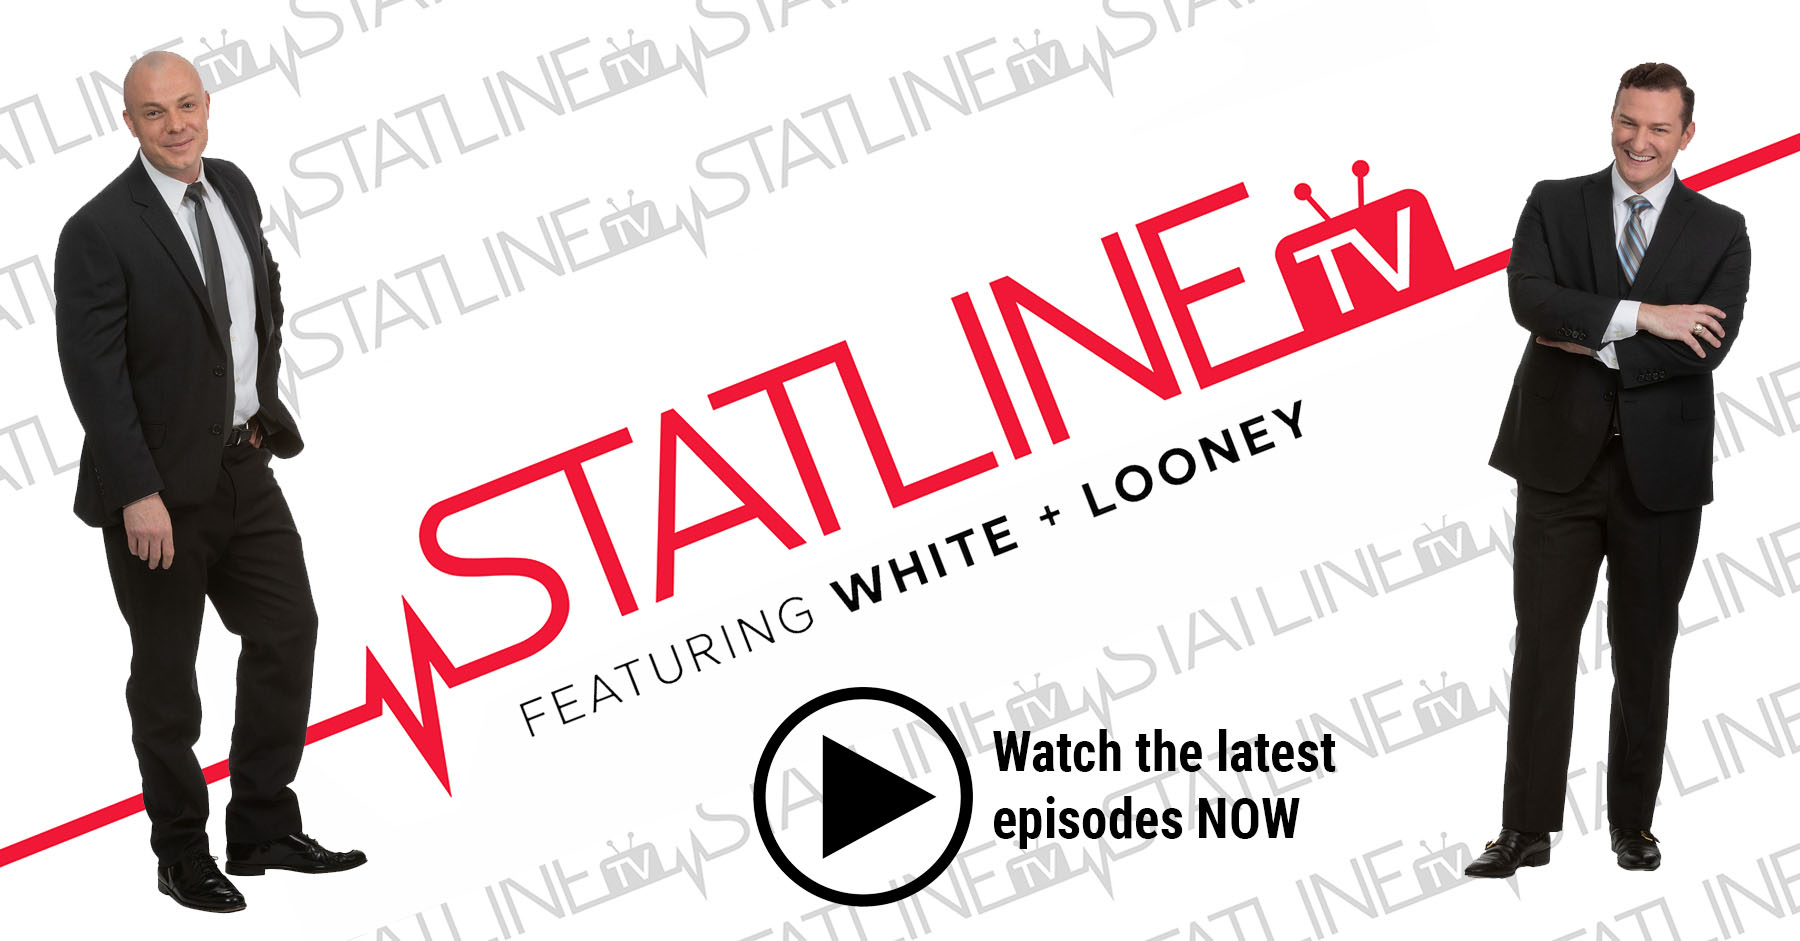 statlinetv image with play button